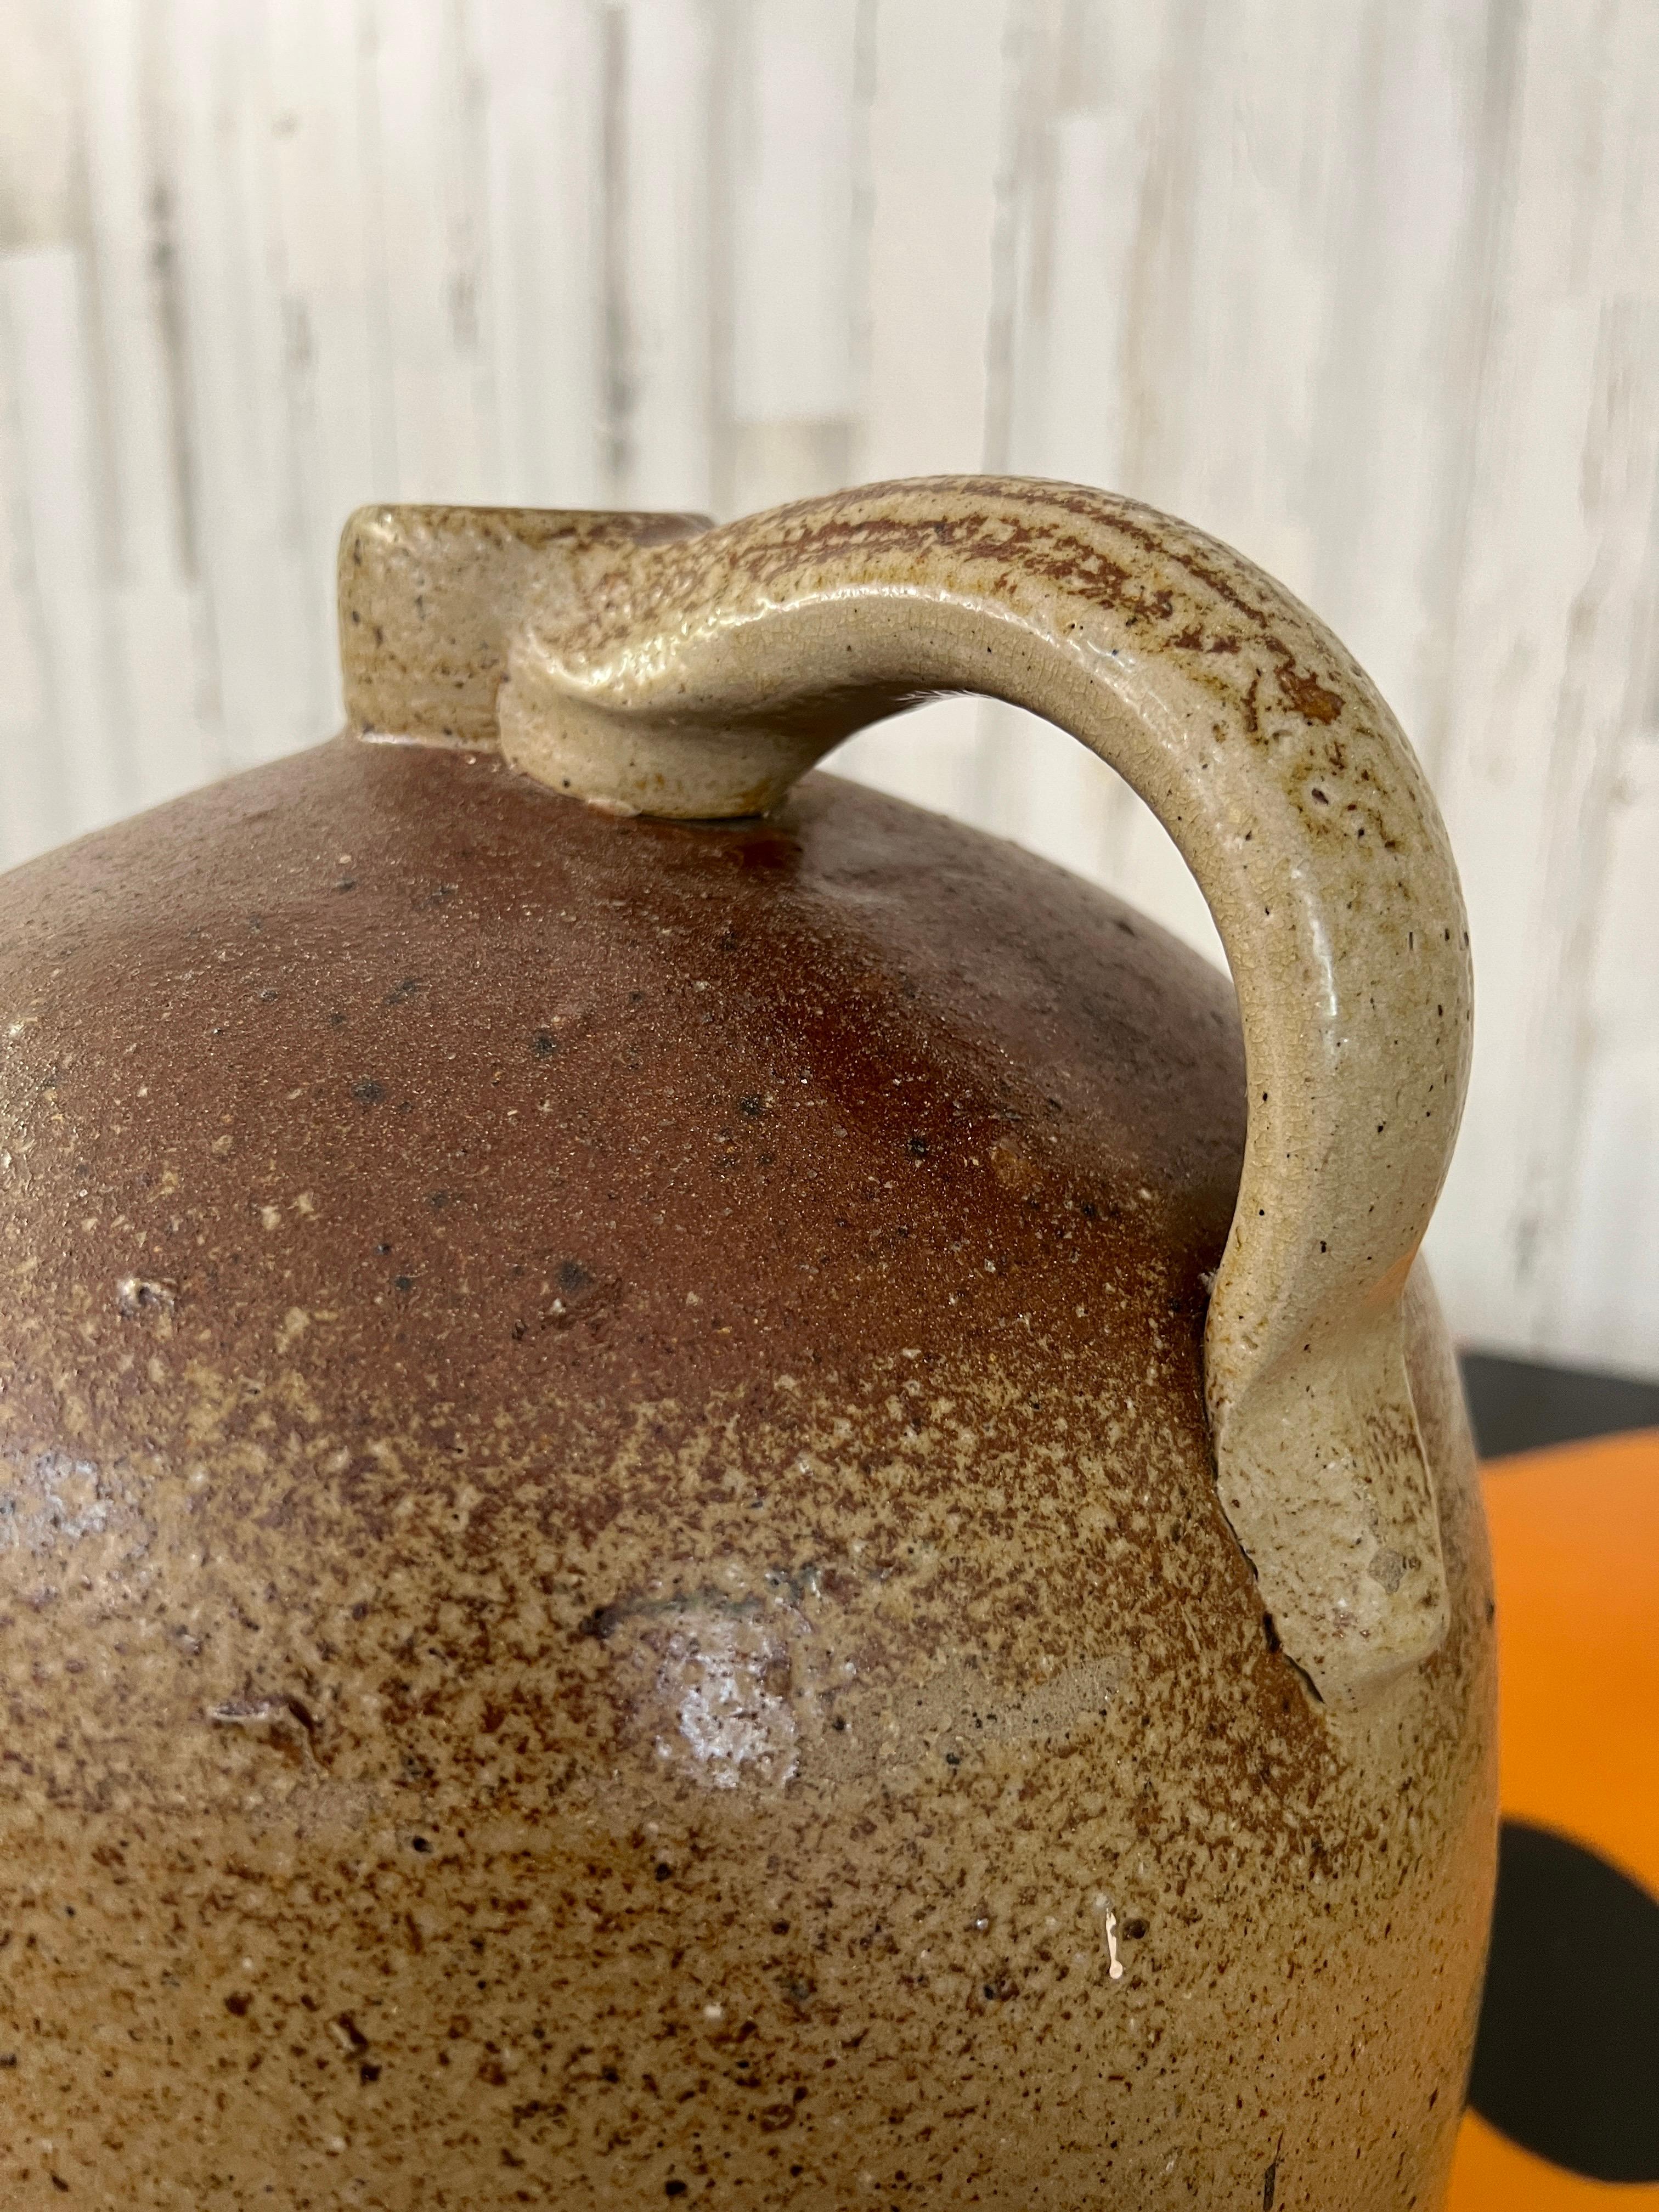 Large Stoneware Jug In Good Condition For Sale In Denton, TX